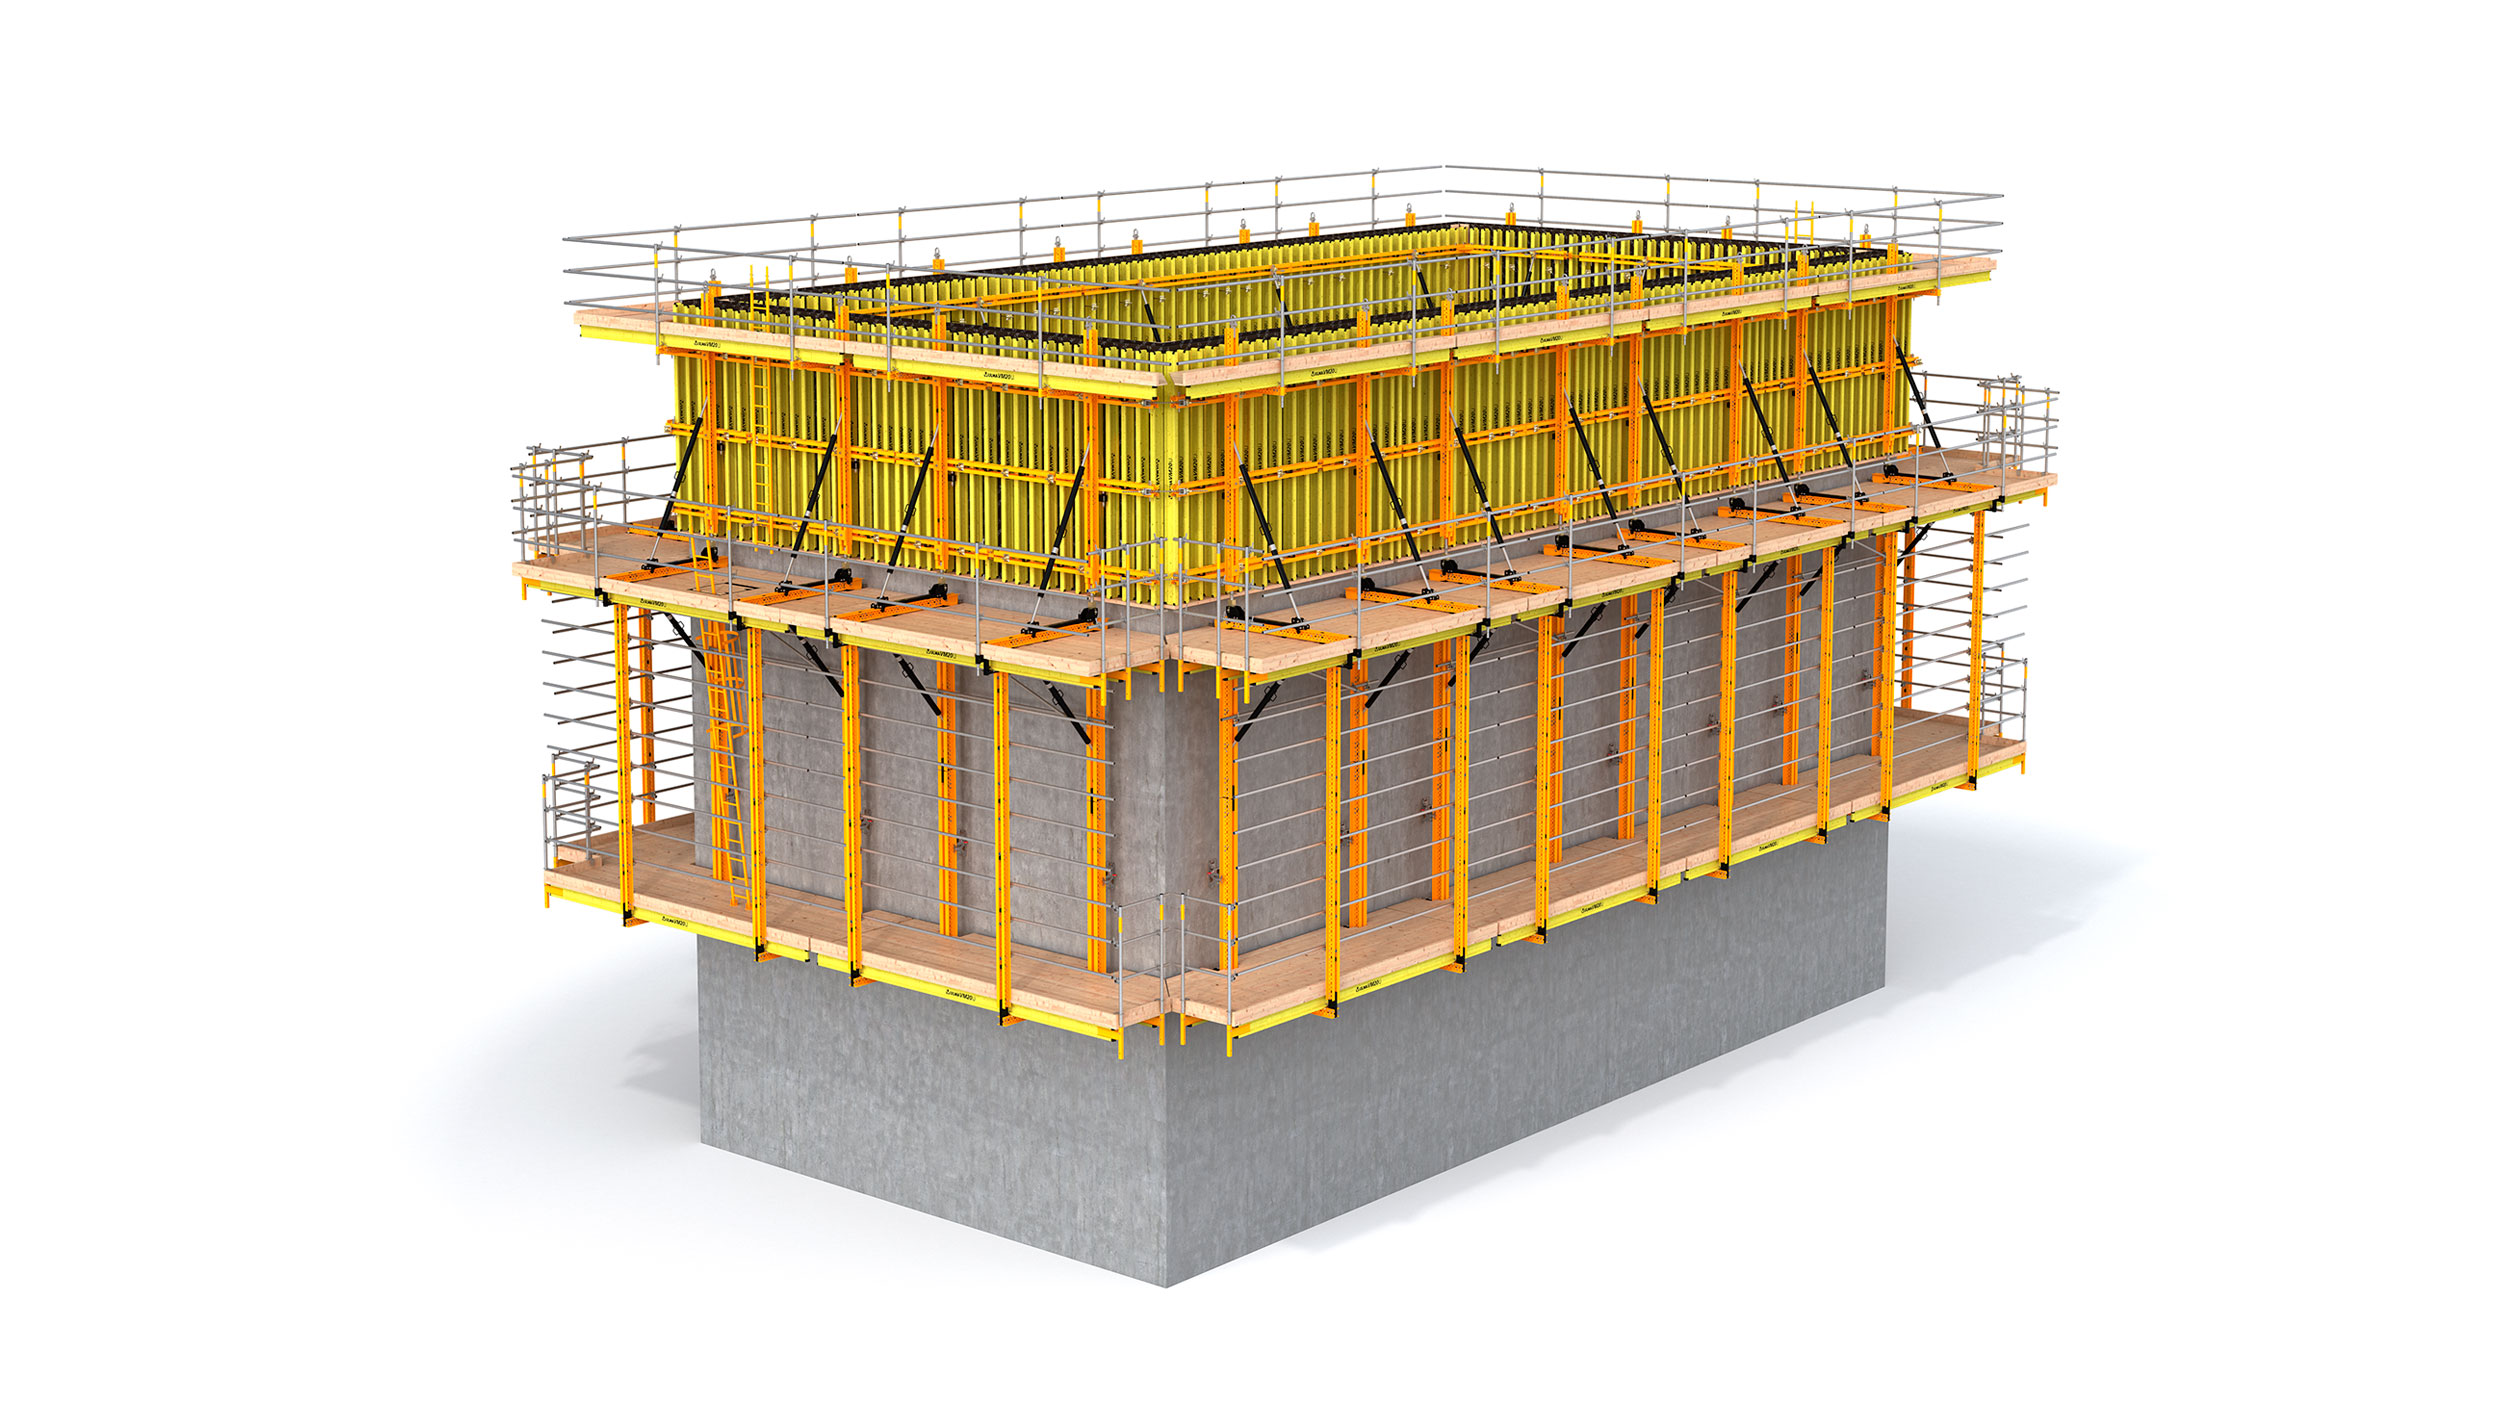 Flexible rail-guided climbing formwork for forming cores, shear walls and perimeter walls using a hydraulic lifting mechanism.